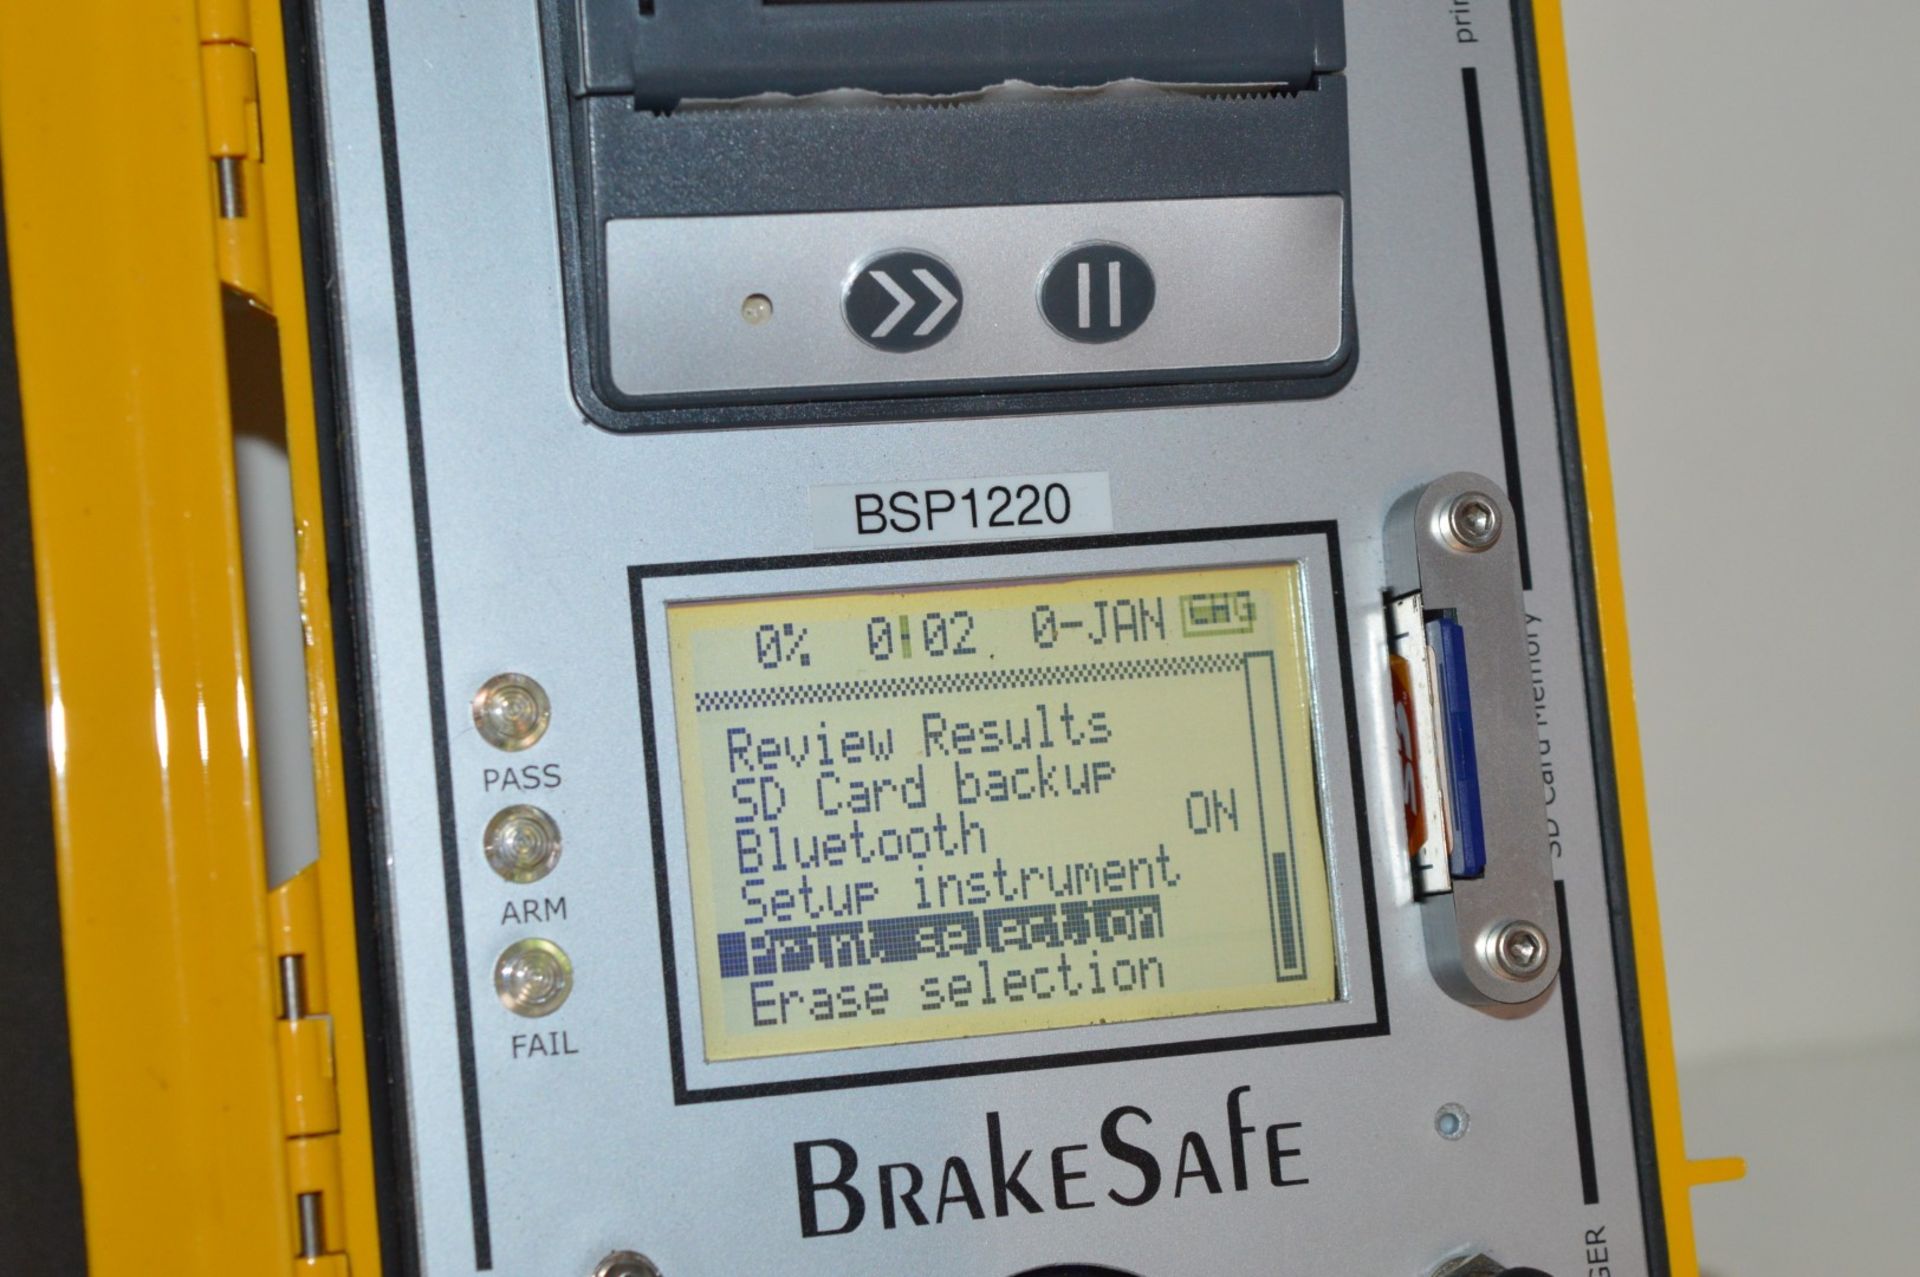 1 x BreakSafe Brake Tester With Printer - Turnkey Instruments - VOSA Approved For All Cars, HGVs and - Image 8 of 10